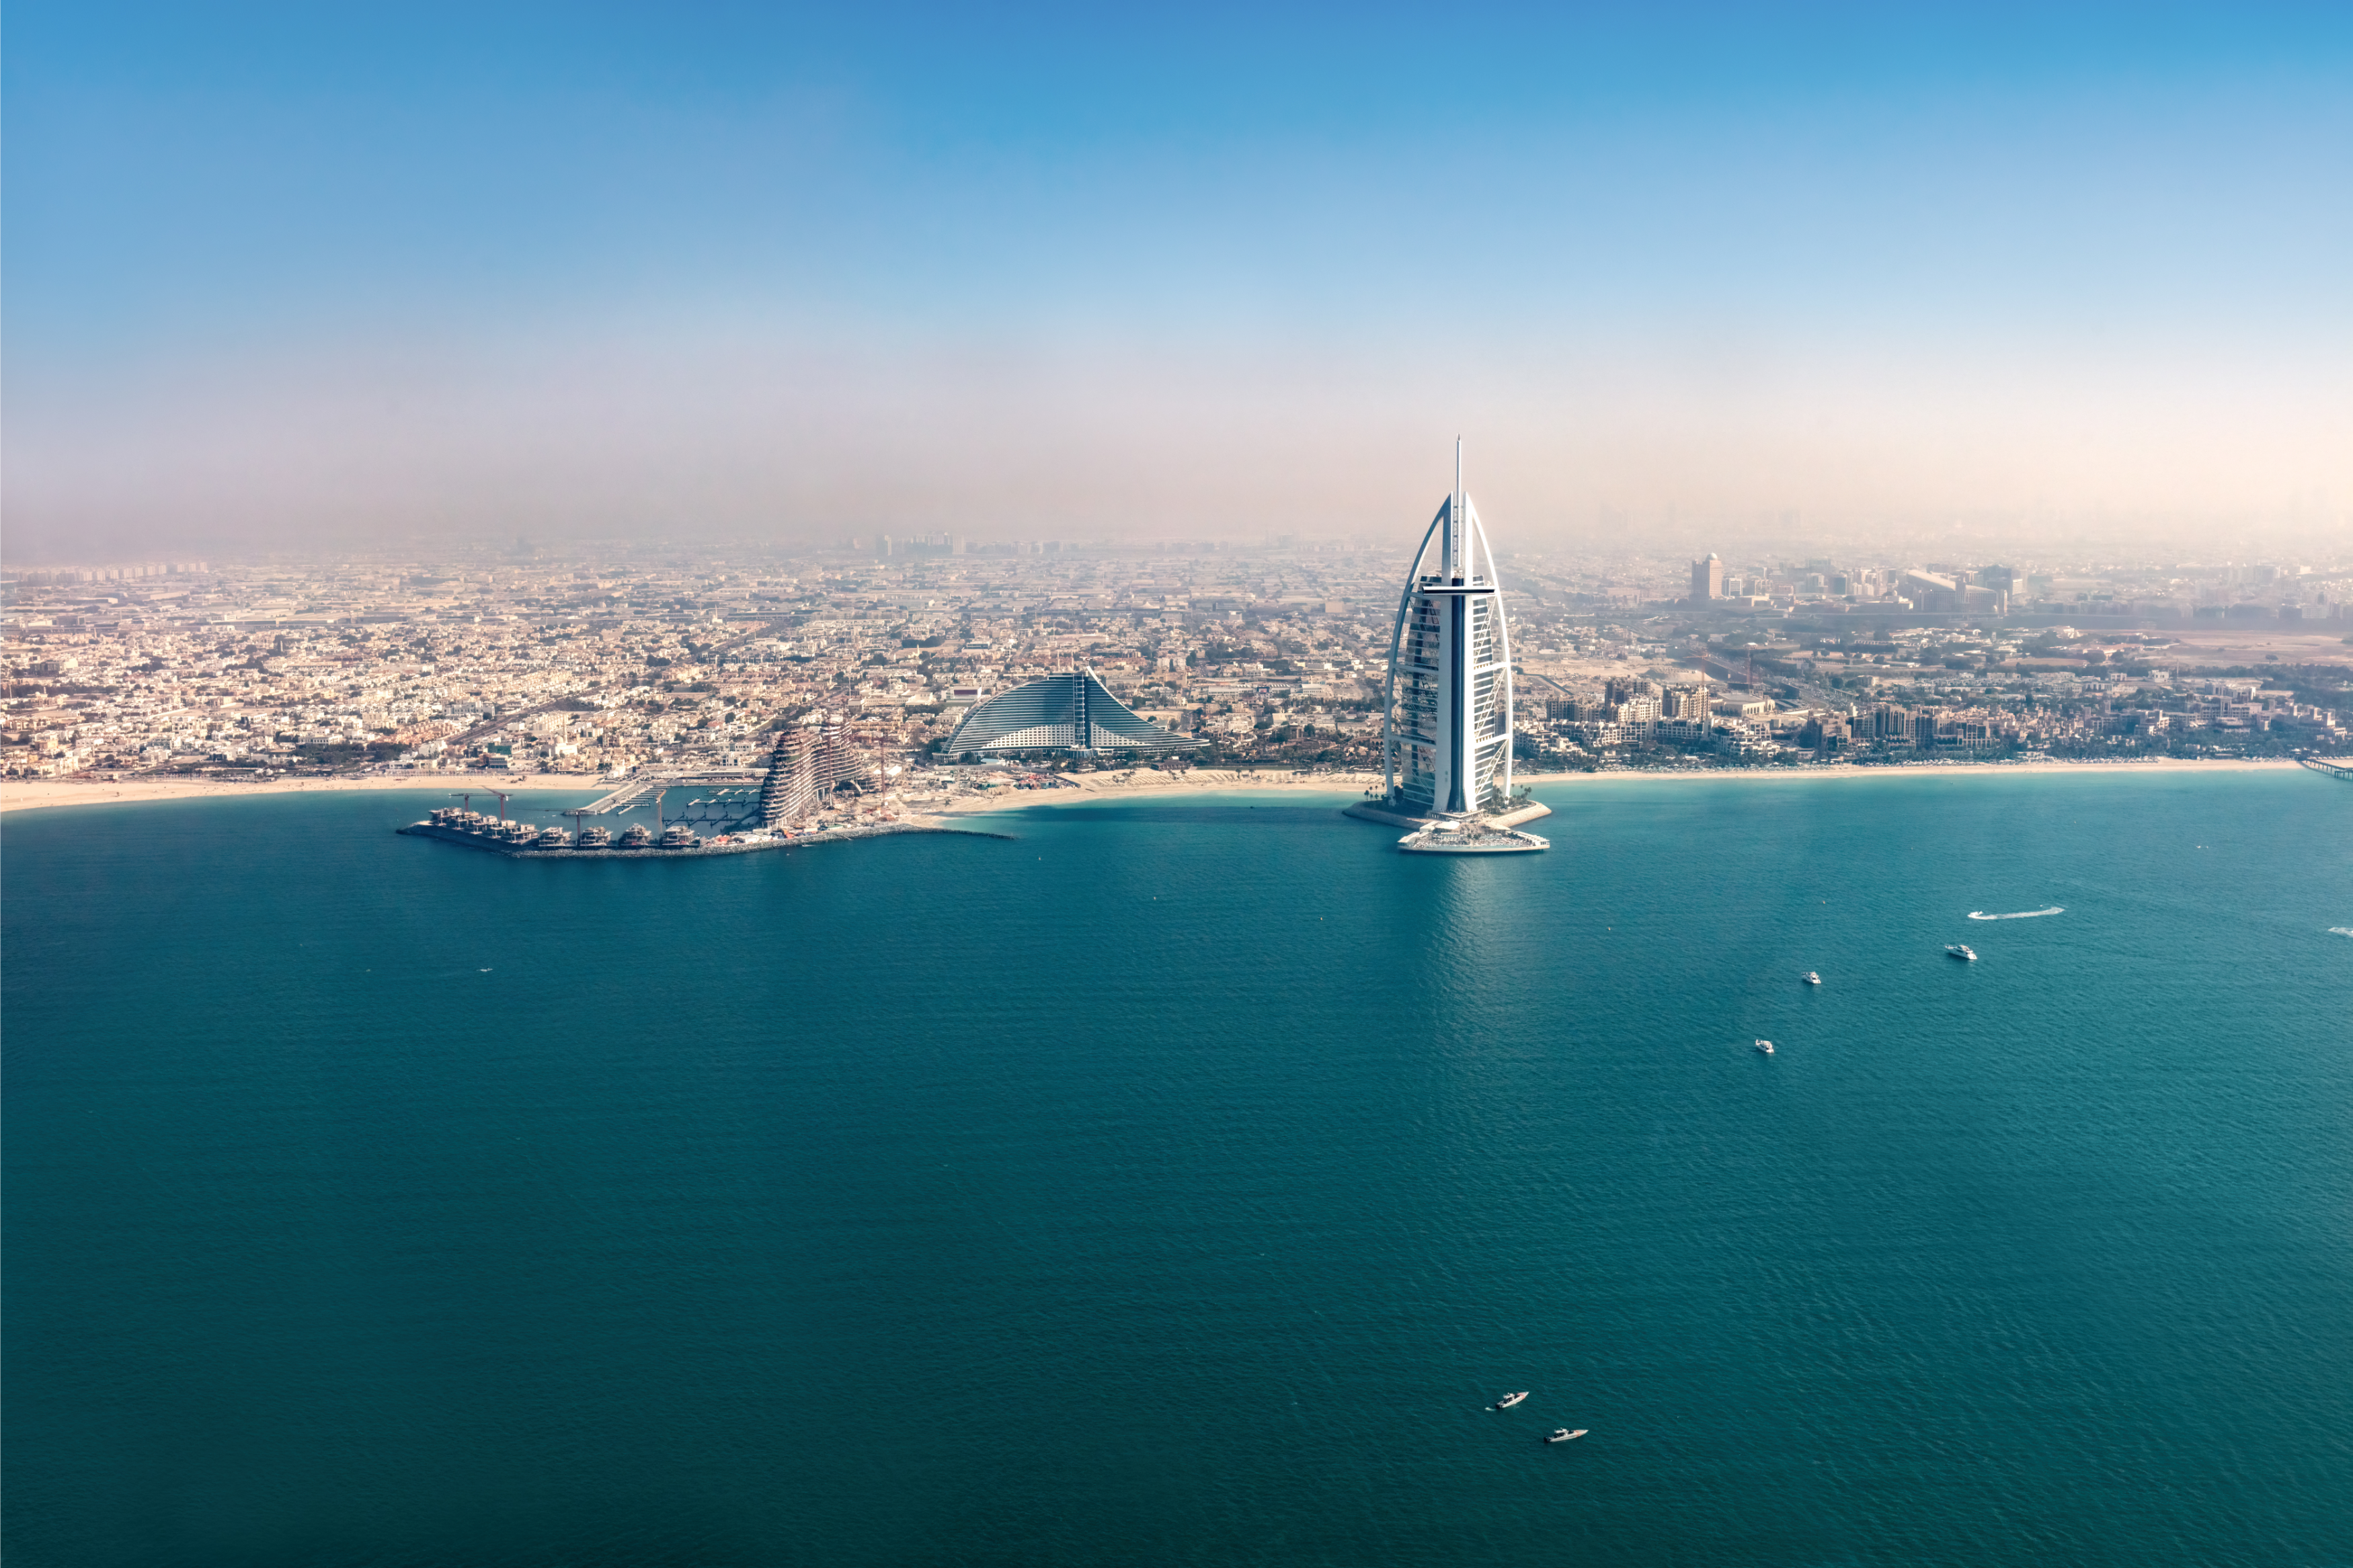 Aerial view of Dubai coast taken from above the sea